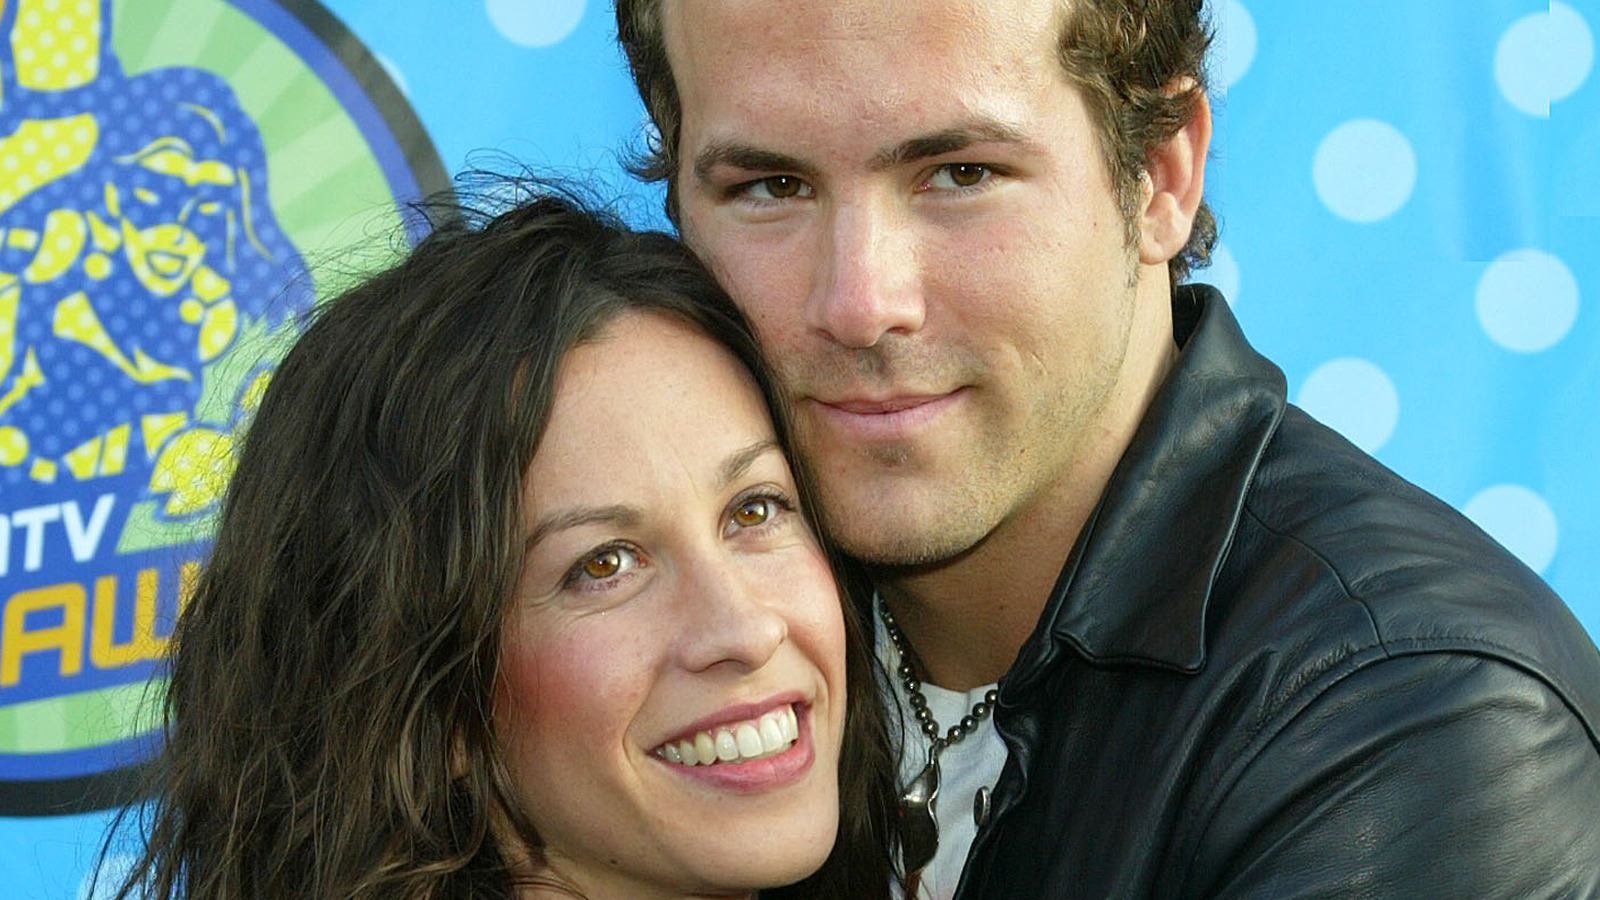 The Truth About Ryan Reynolds And Alanis Morissette's Relationship.